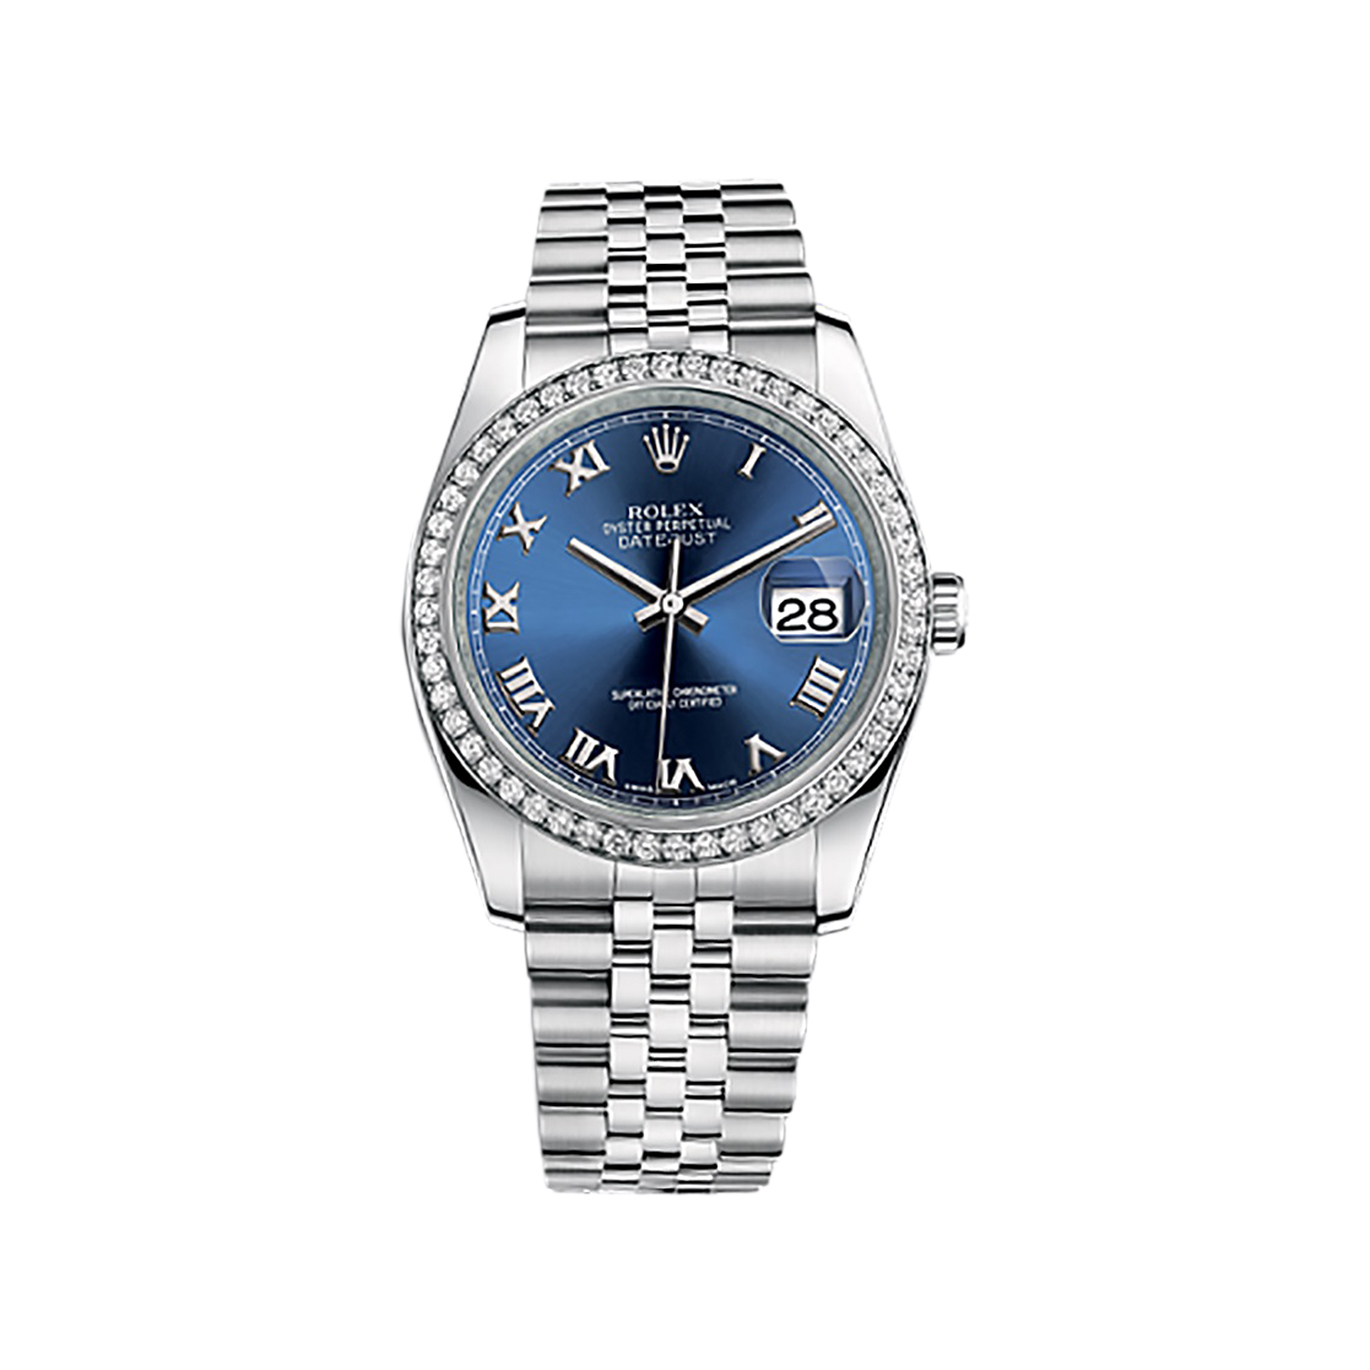 Datejust 36 116244 White Gold & Stainless Steel Watch (Blue)